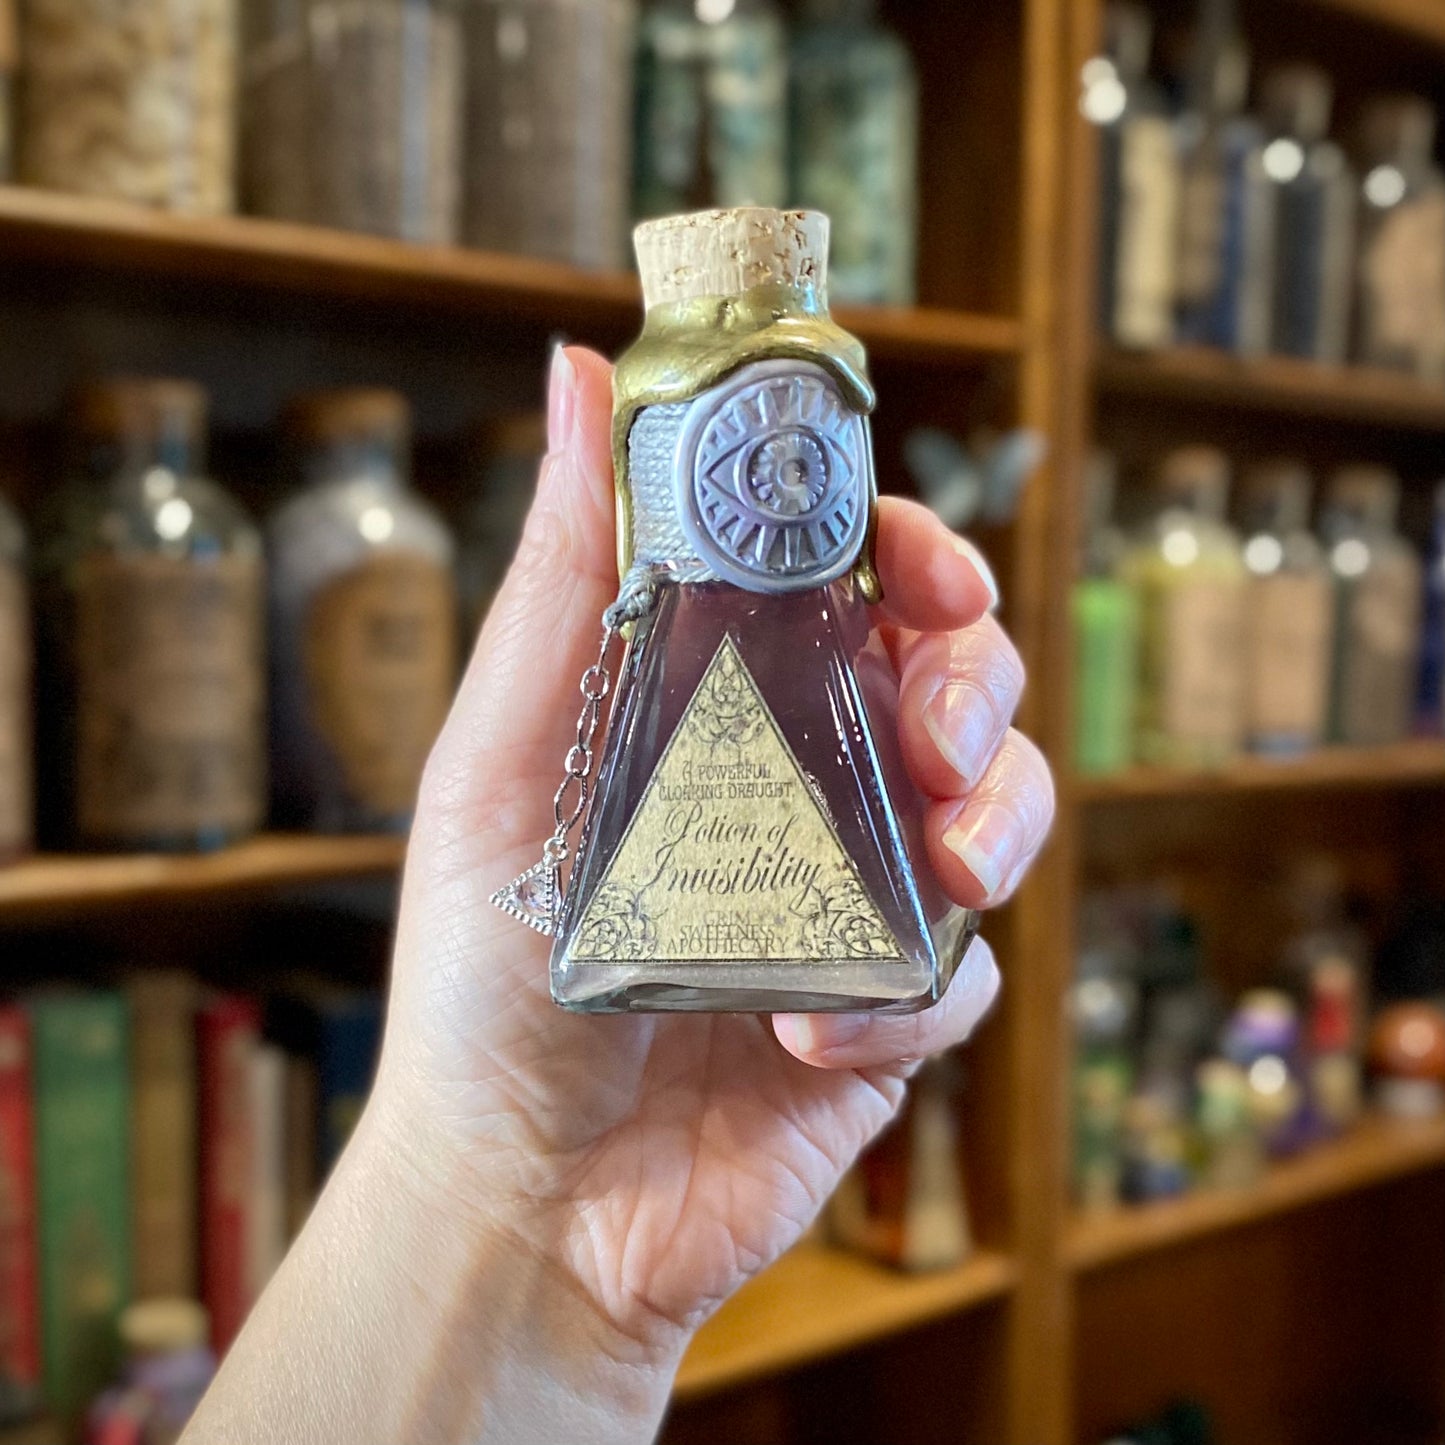 Potion of Invisibility, A Color Changing Potion Bottle Prop